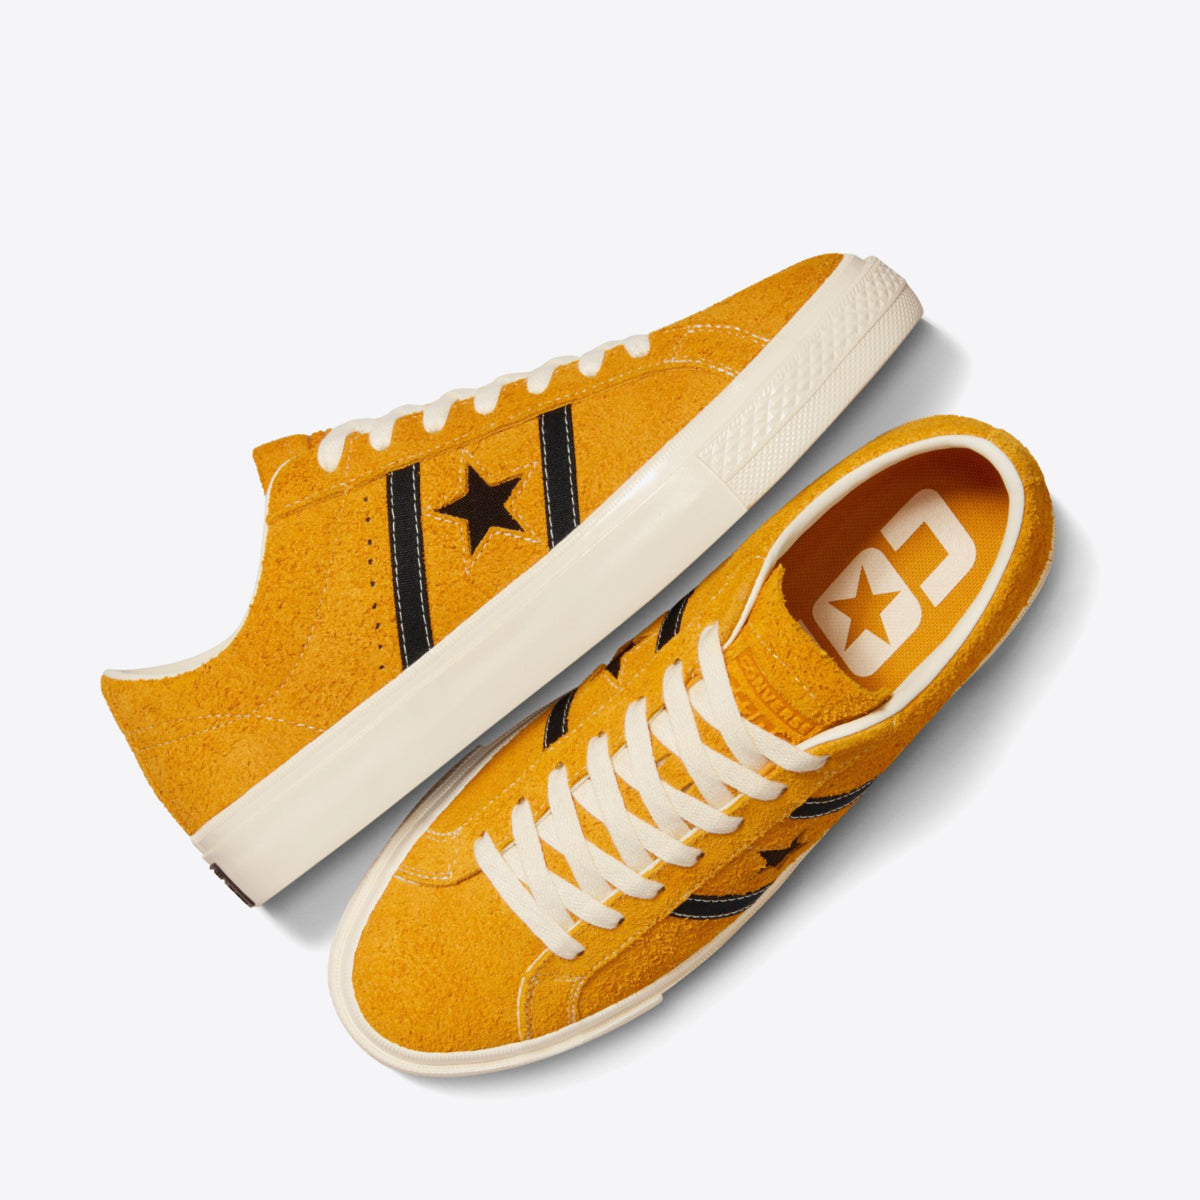 CONVERSE One Star Academy Pro Low Sunflower Gold/Black - Image 4